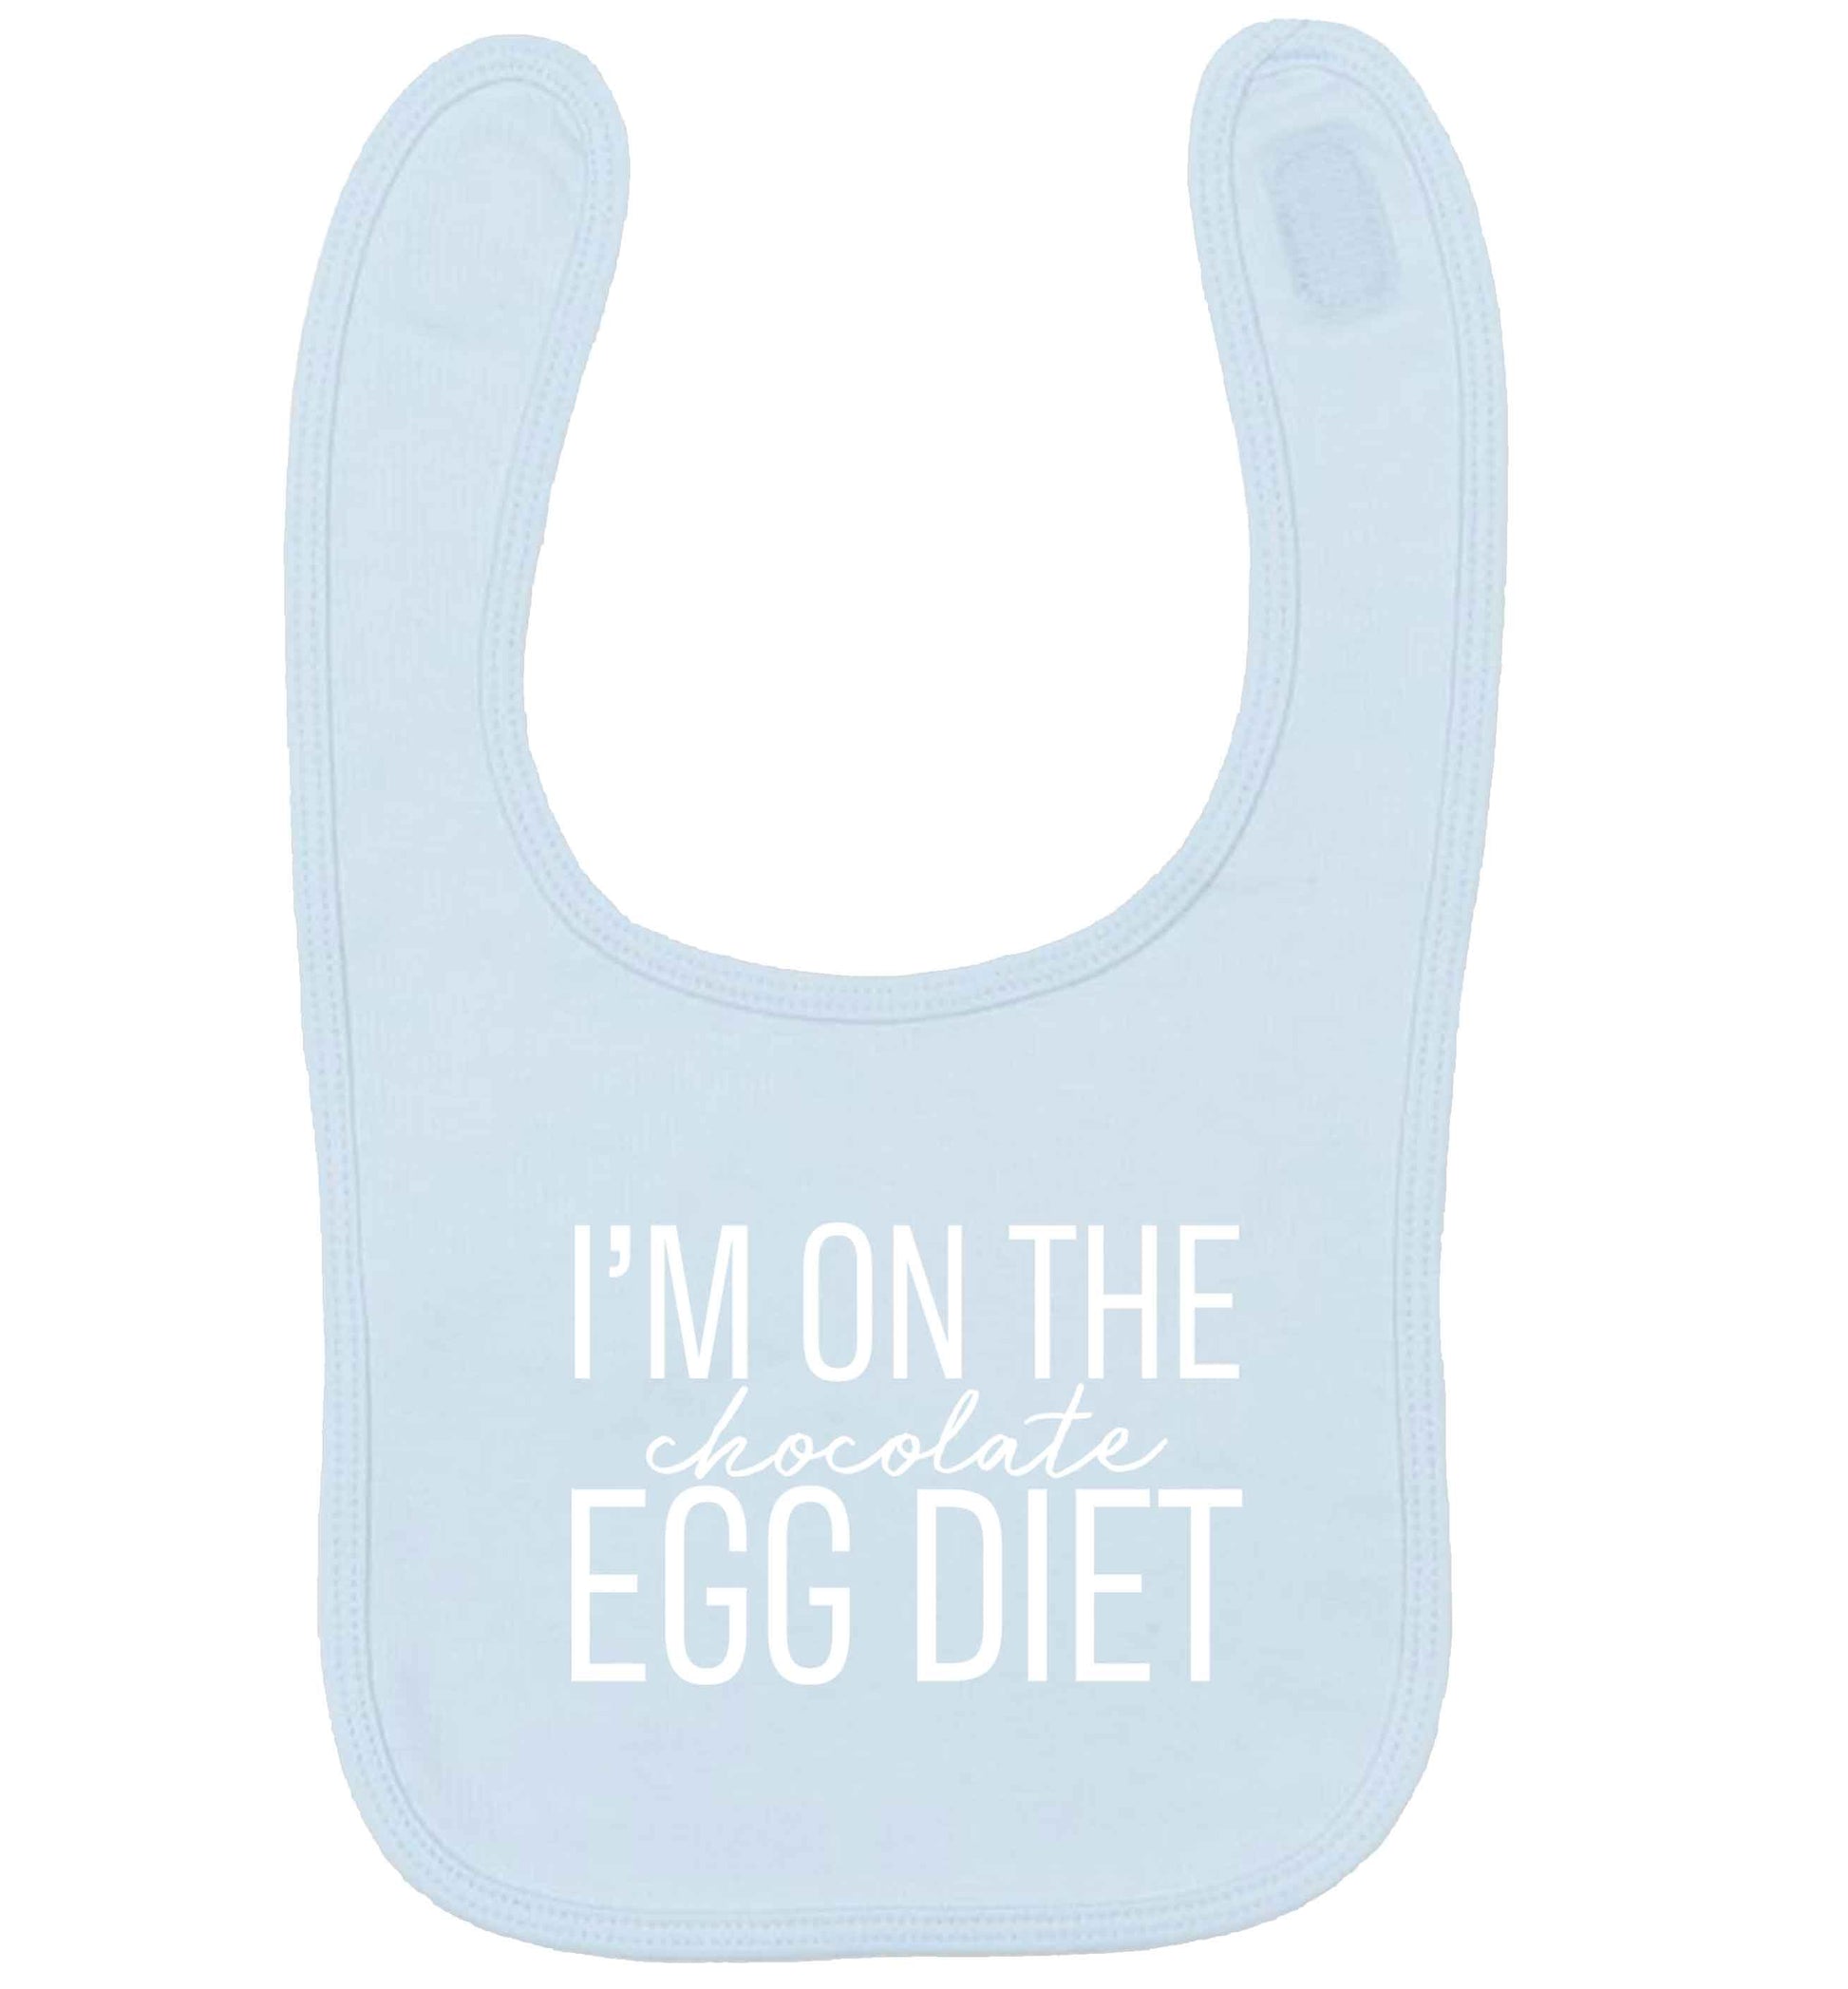 I'm on the chocolate egg diet pale blue baby bib